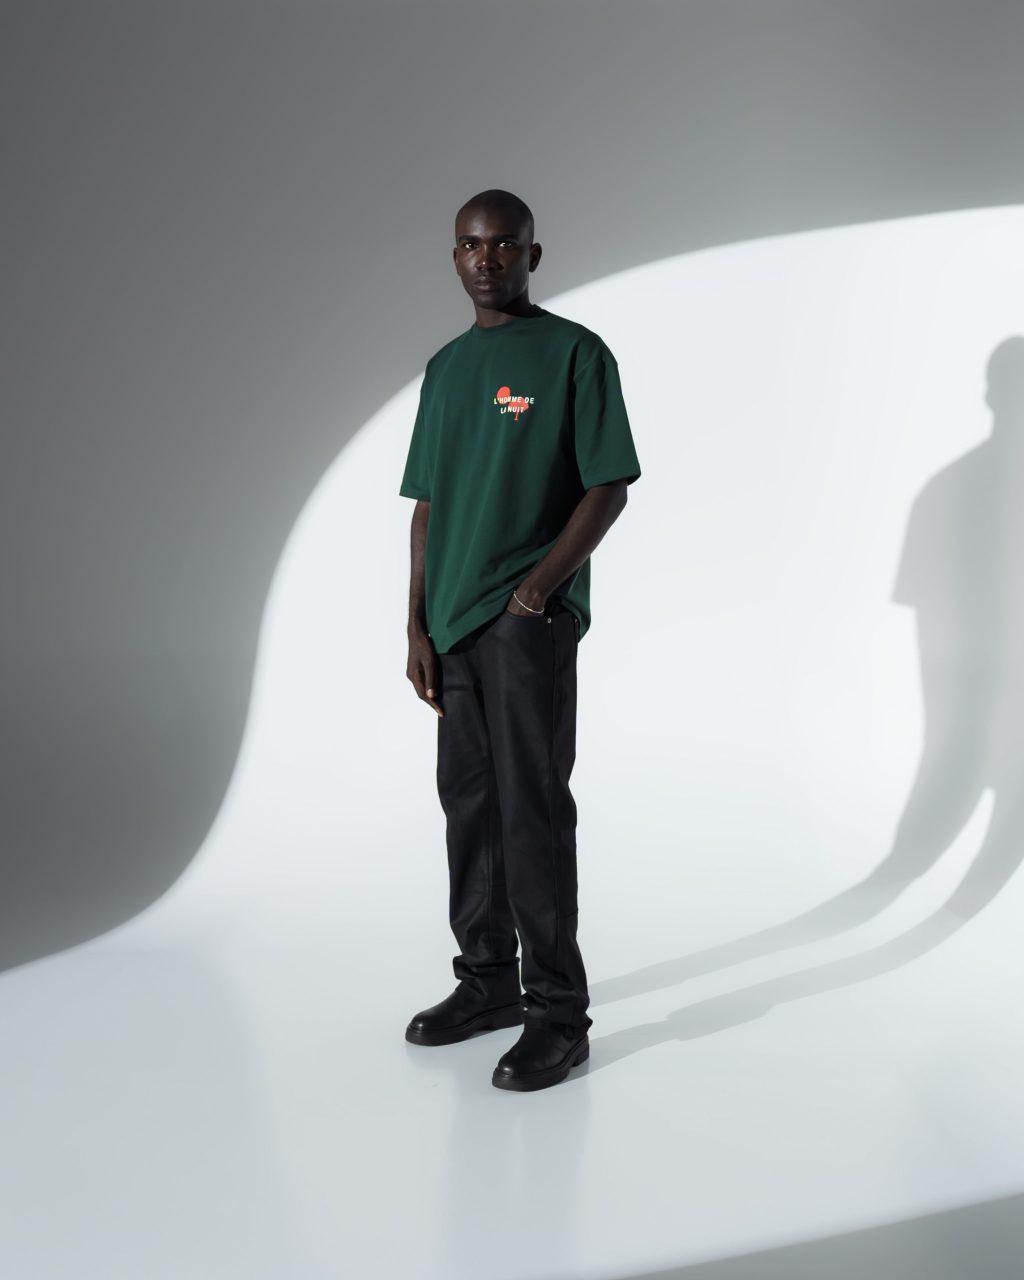 Streetwear Don't Waste Culture abandons internet-only strategy: 'Physical retail now gives us opportunities to grow'